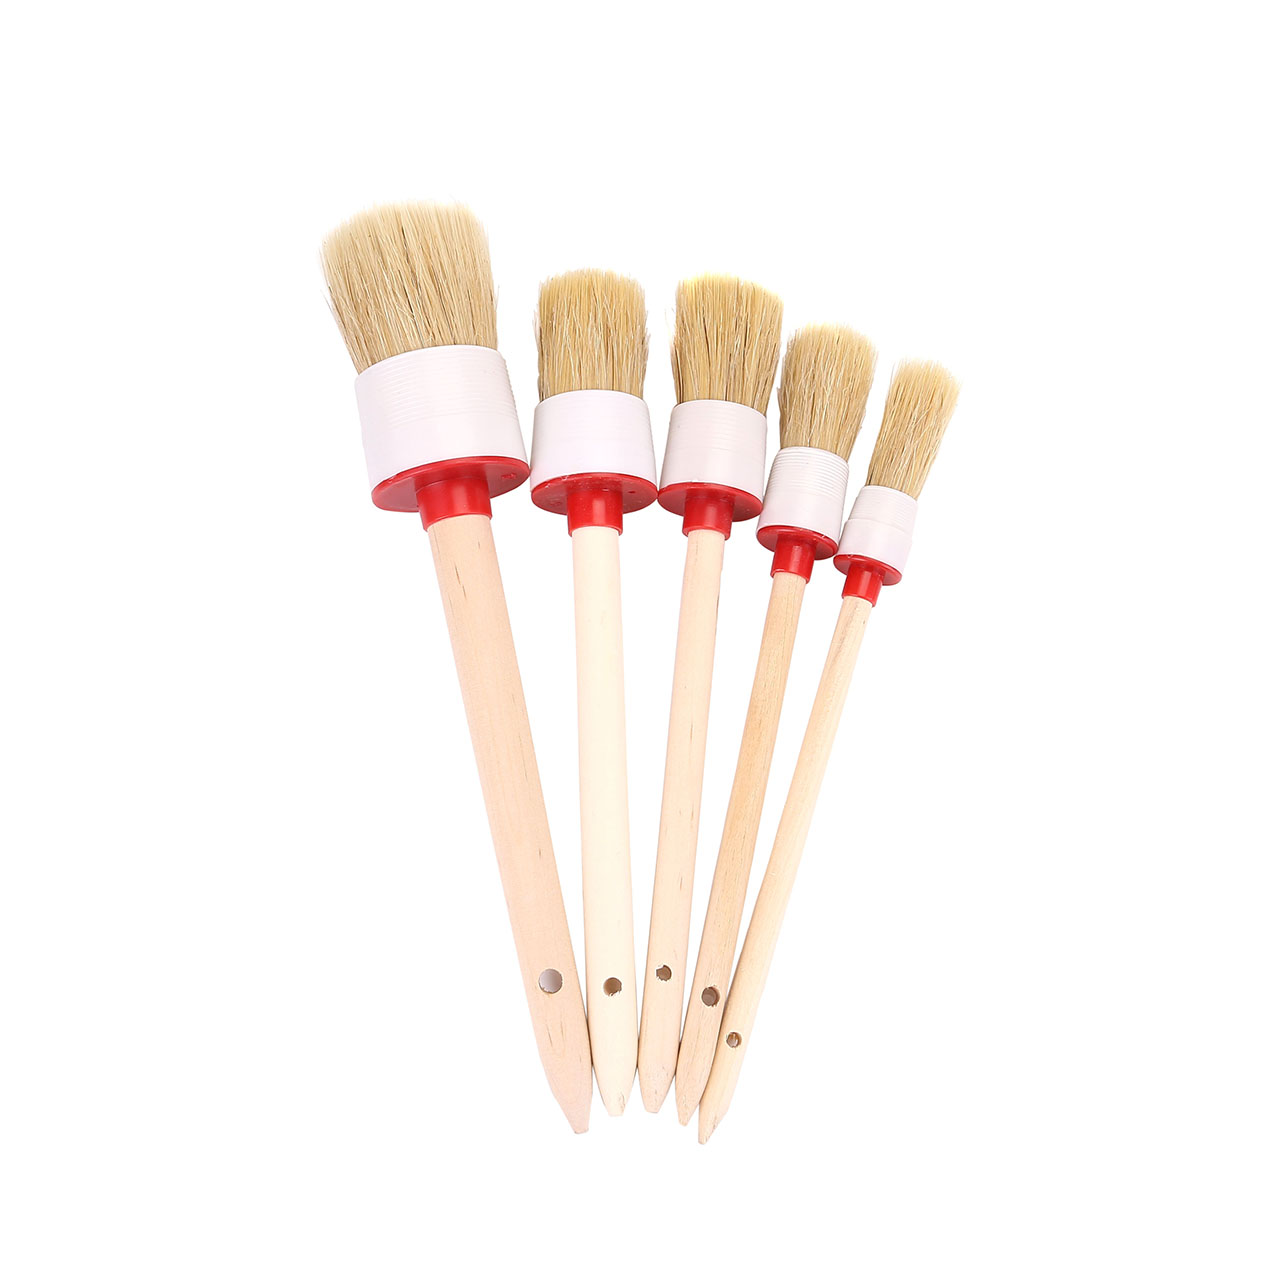 ACBungji Natural Hoar Hair Bristle Detail Cleaning Brush For Exterior Wheels Engine Interior Air Vents Trim Leather (set of 5)